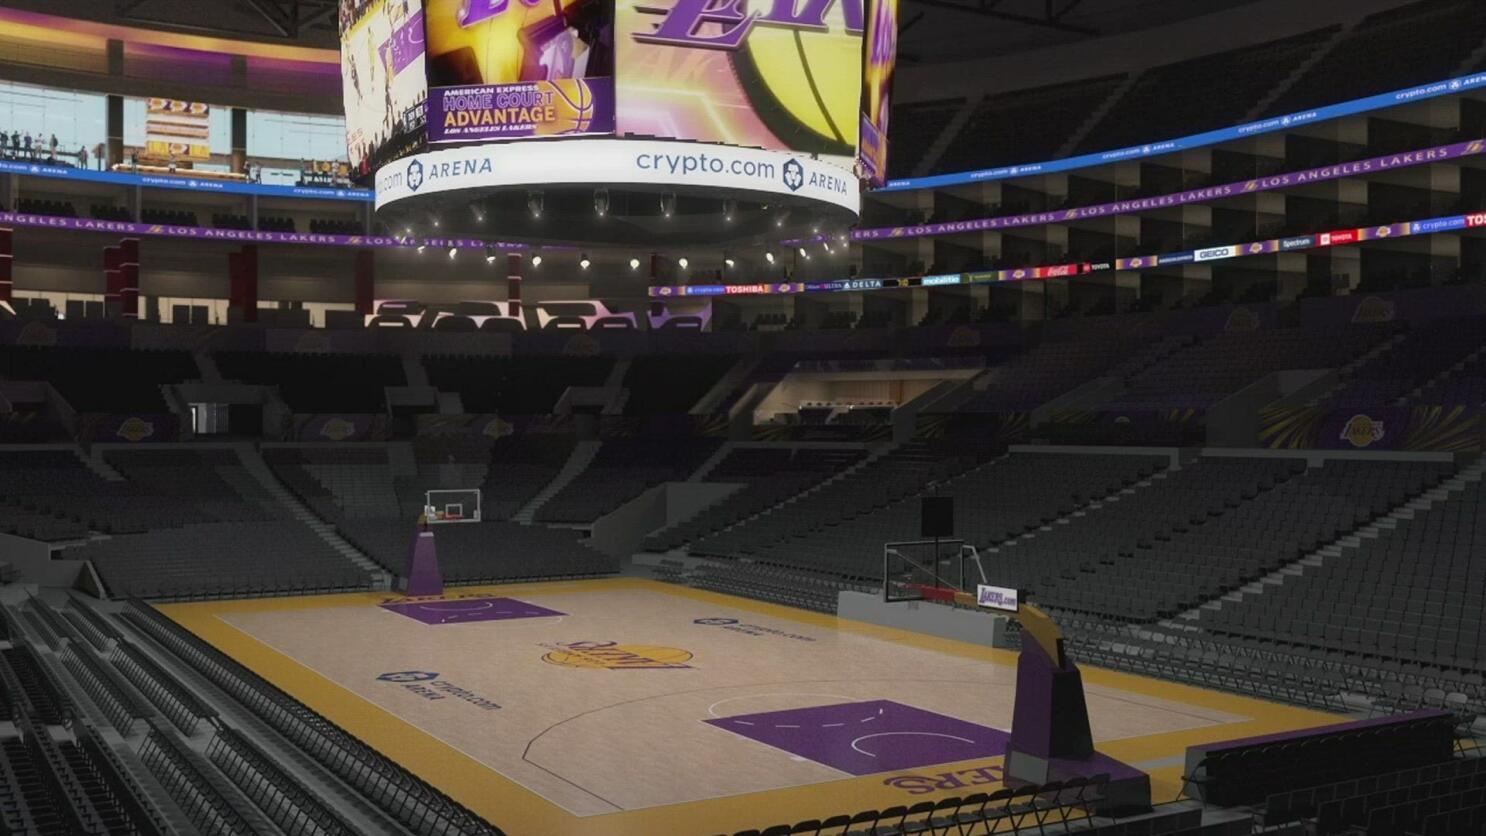 The Staples Center sports arena, home of the Los Angeles Lakers